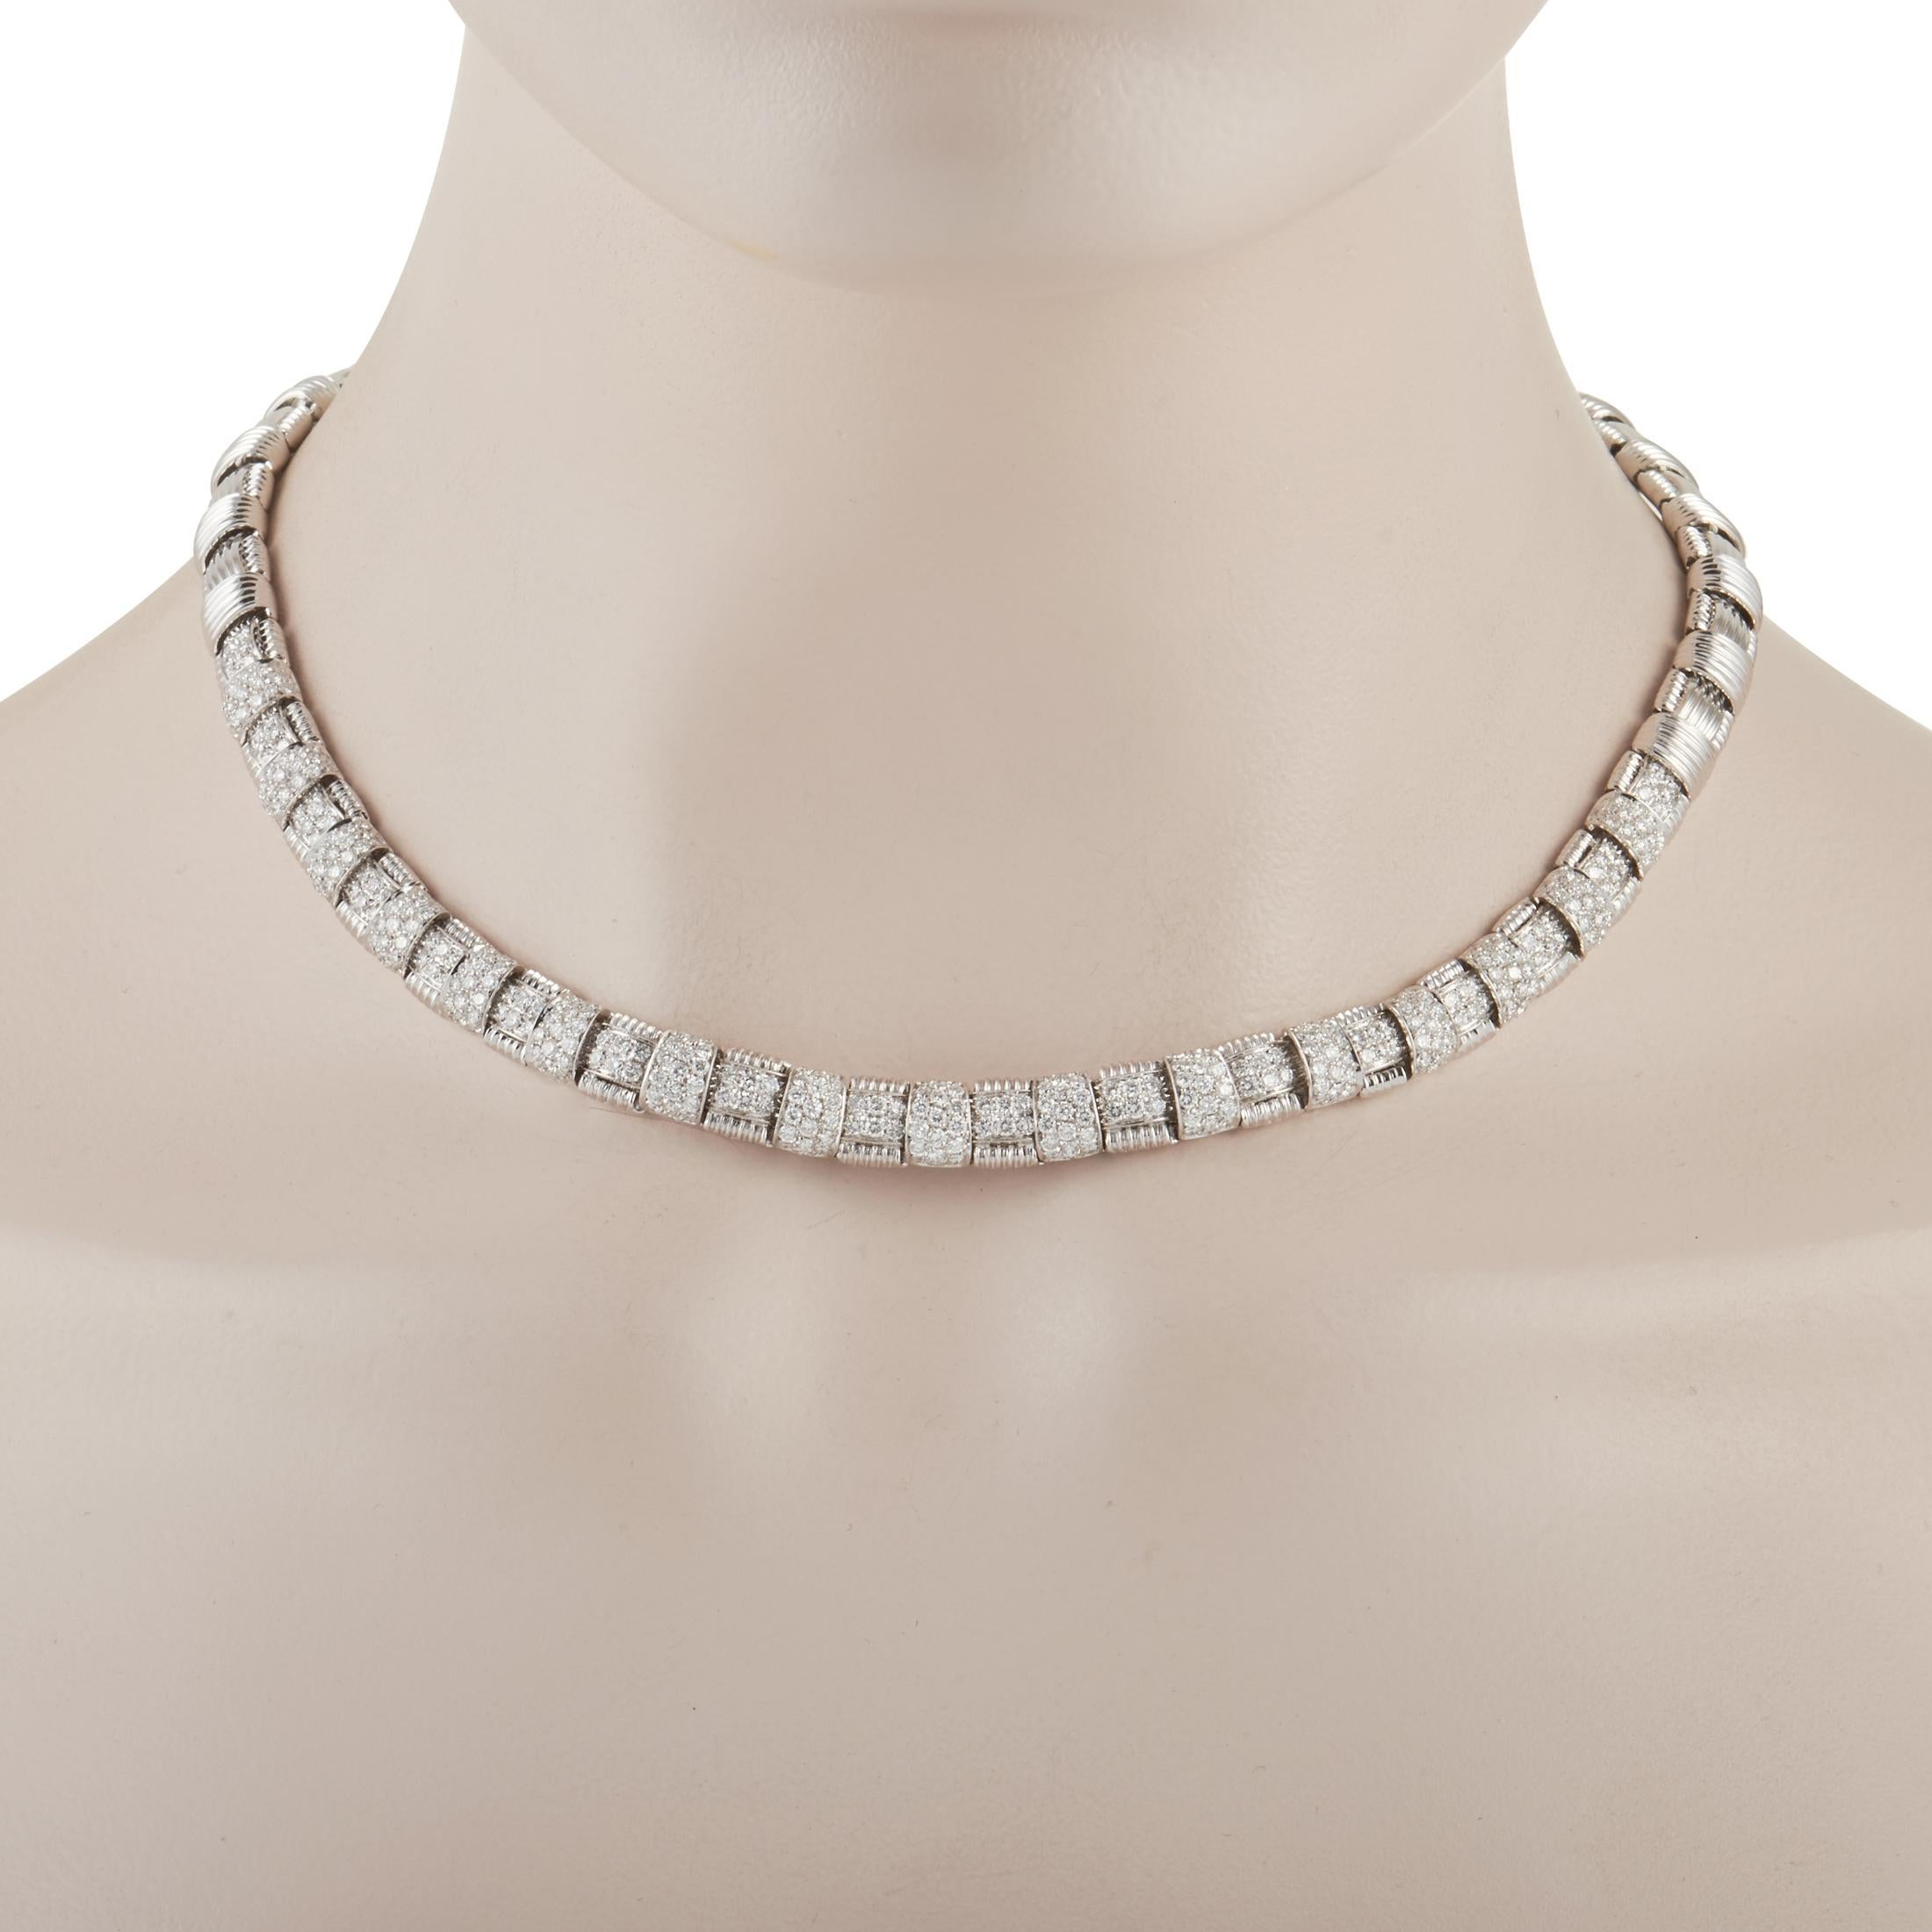 This bold Roberto Coin Appassionata 18K White Gold 7.00 ct Diamond Necklace is made with 18K white gold forming a thick chain of links and set with 7.00 carats round diamonds. The back of the links feature heart cutout on each and are set with a